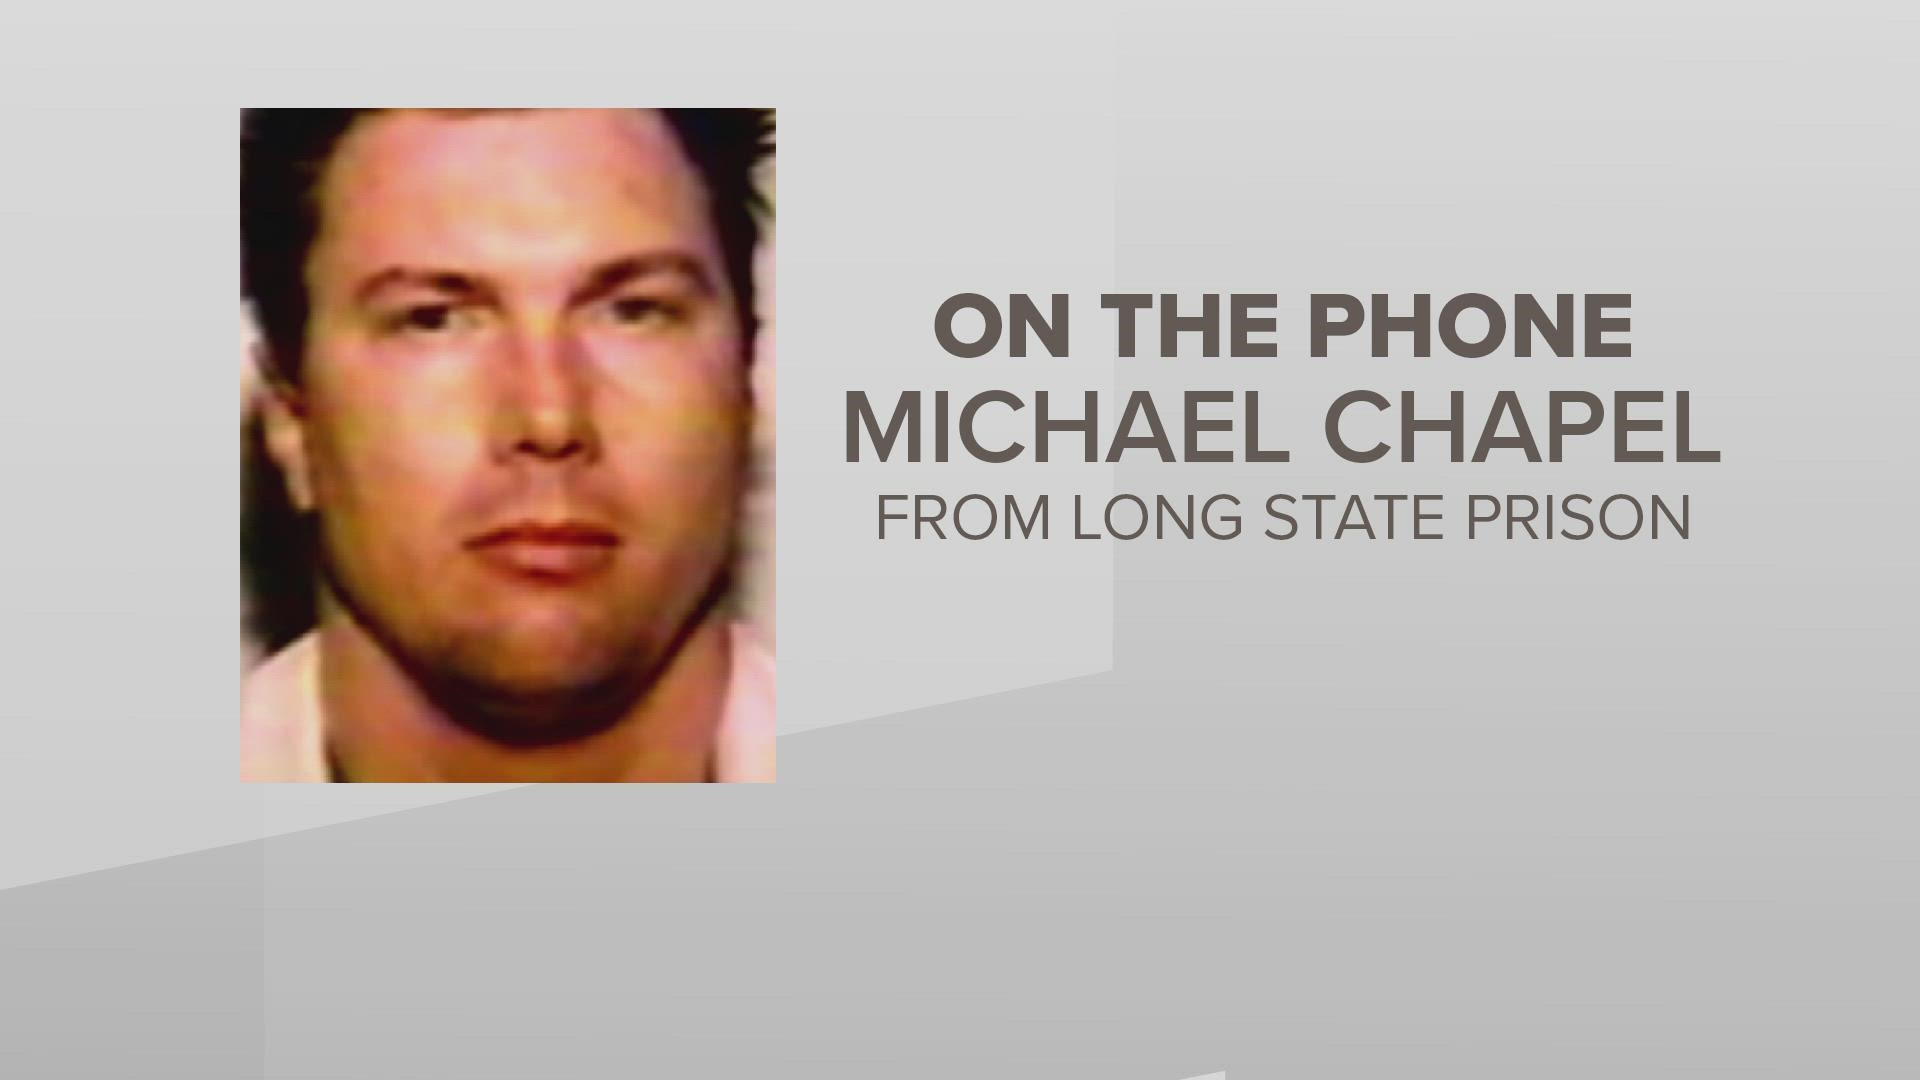 11Alive News uncovered evidence never heard or seen by the jury, which in 1995 convicted Michael Chapel to life in prison for murder.